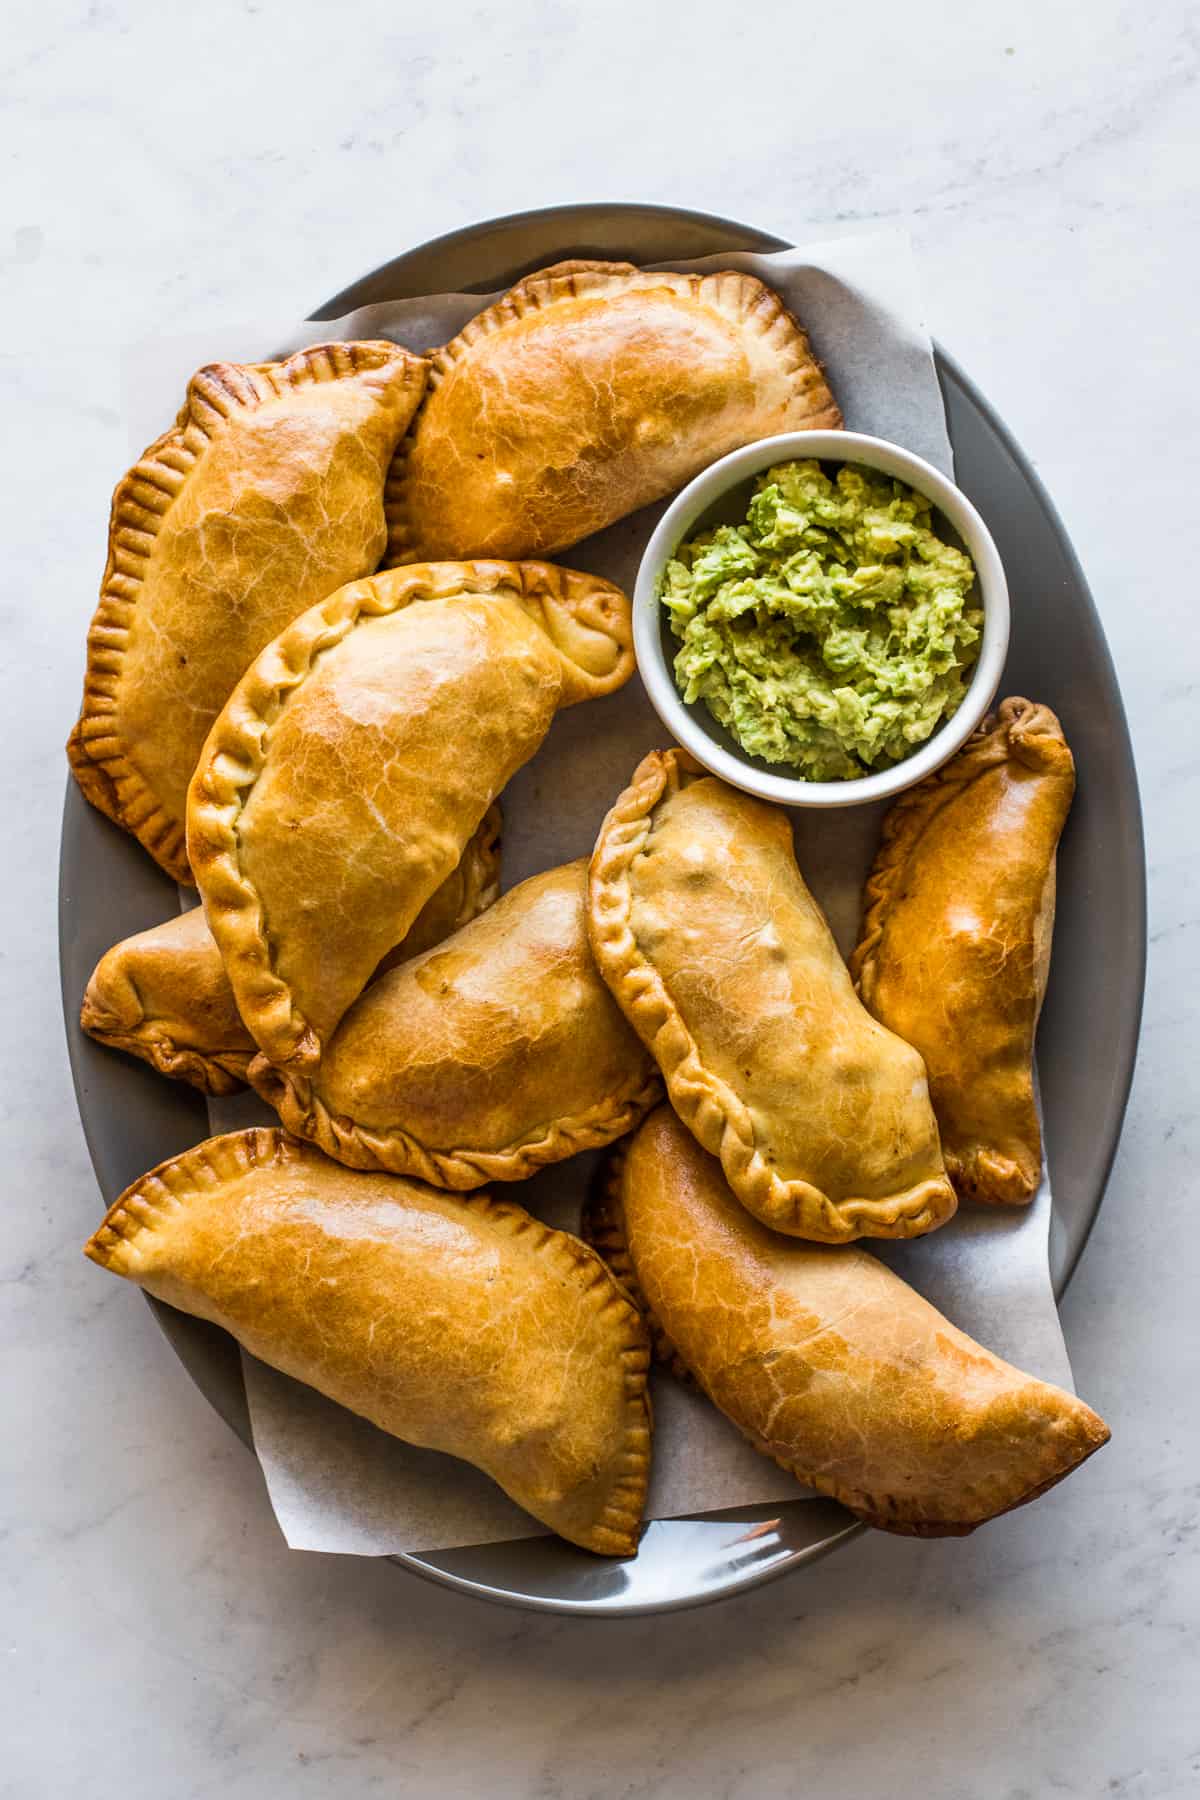 Beef empanadas on a platter with a bowl of guacamole on the side.